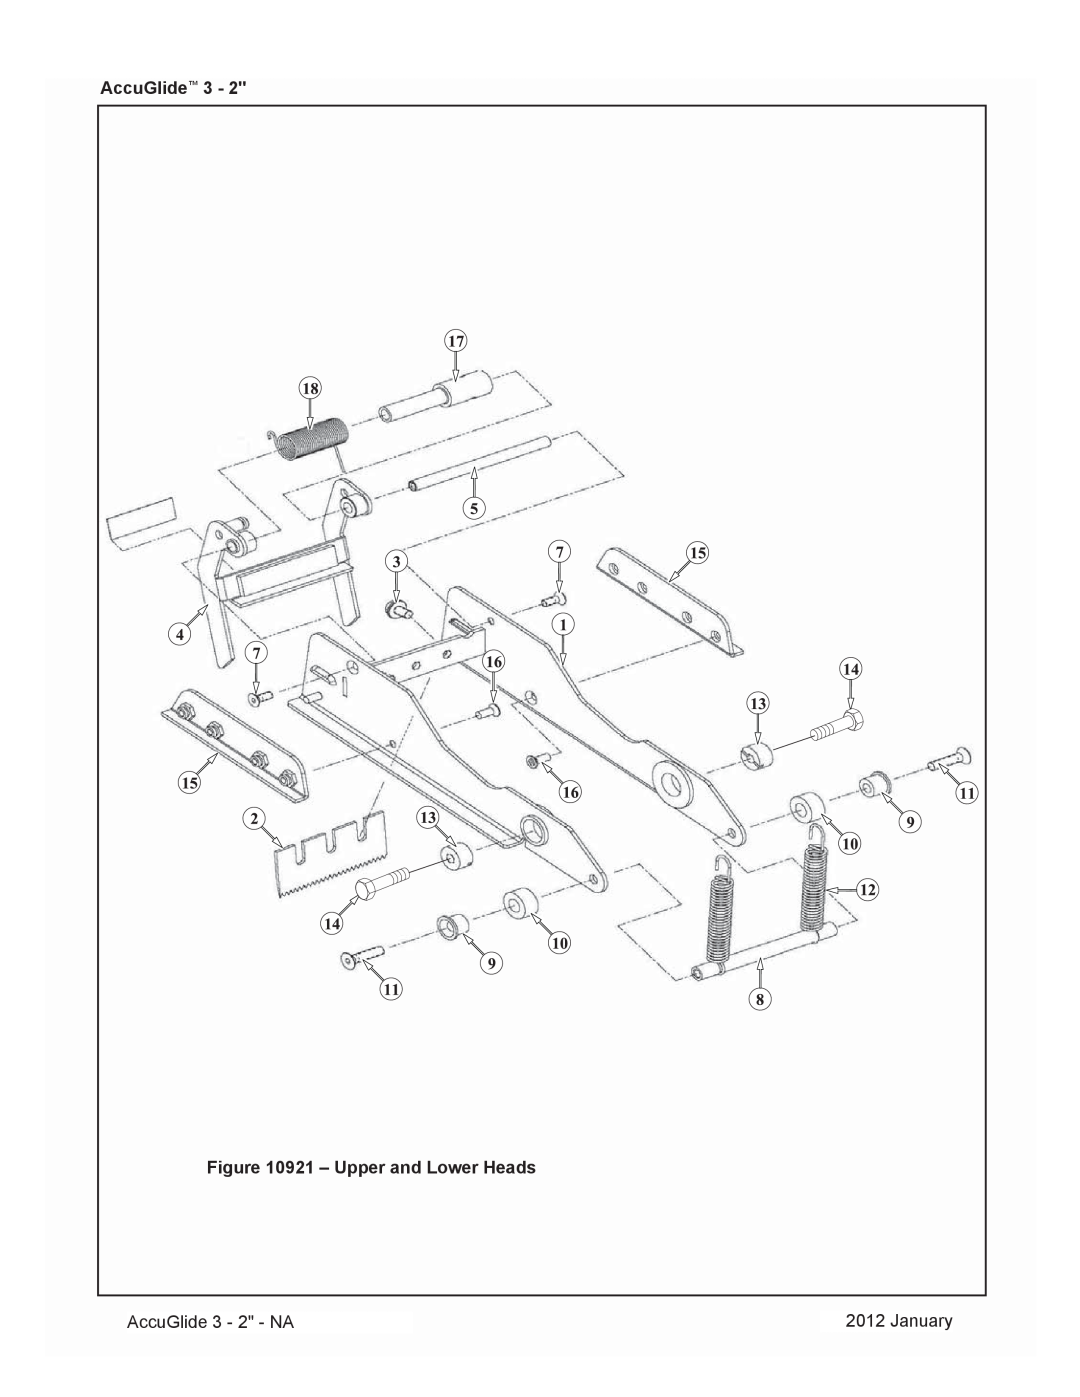 3M 40800 operating instructions Upper and Lower Heads, AccuGlide 3 - 2 - NA, January 